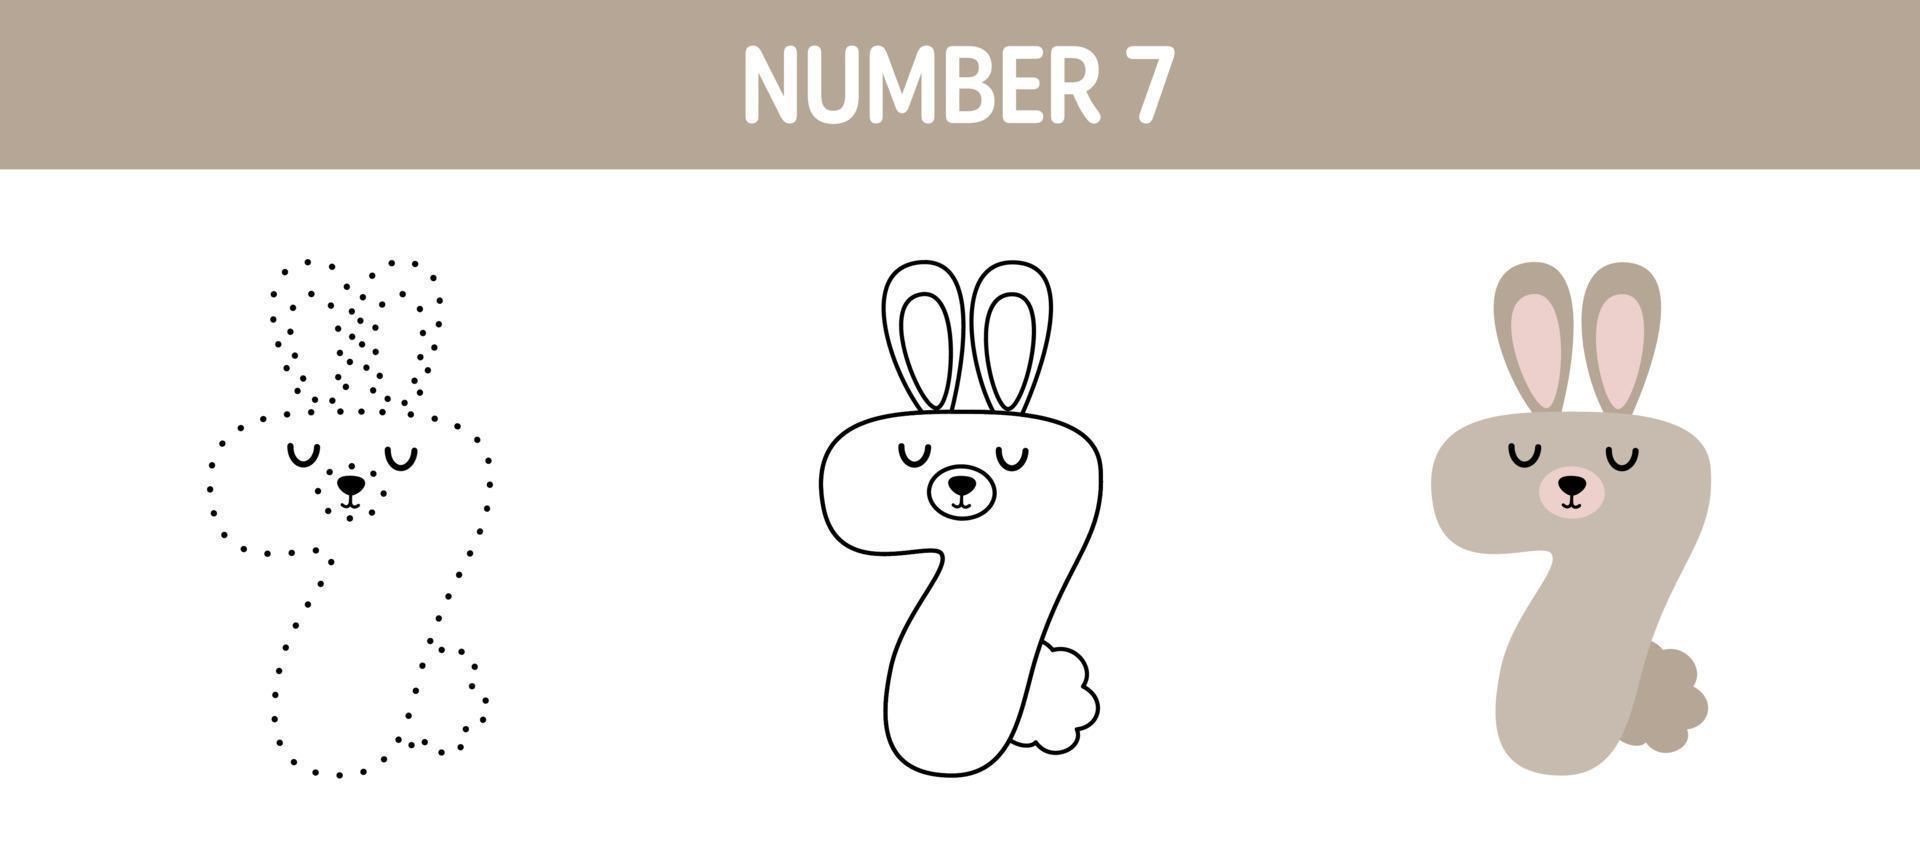 Number 7 tracing and coloring worksheet for kids vector